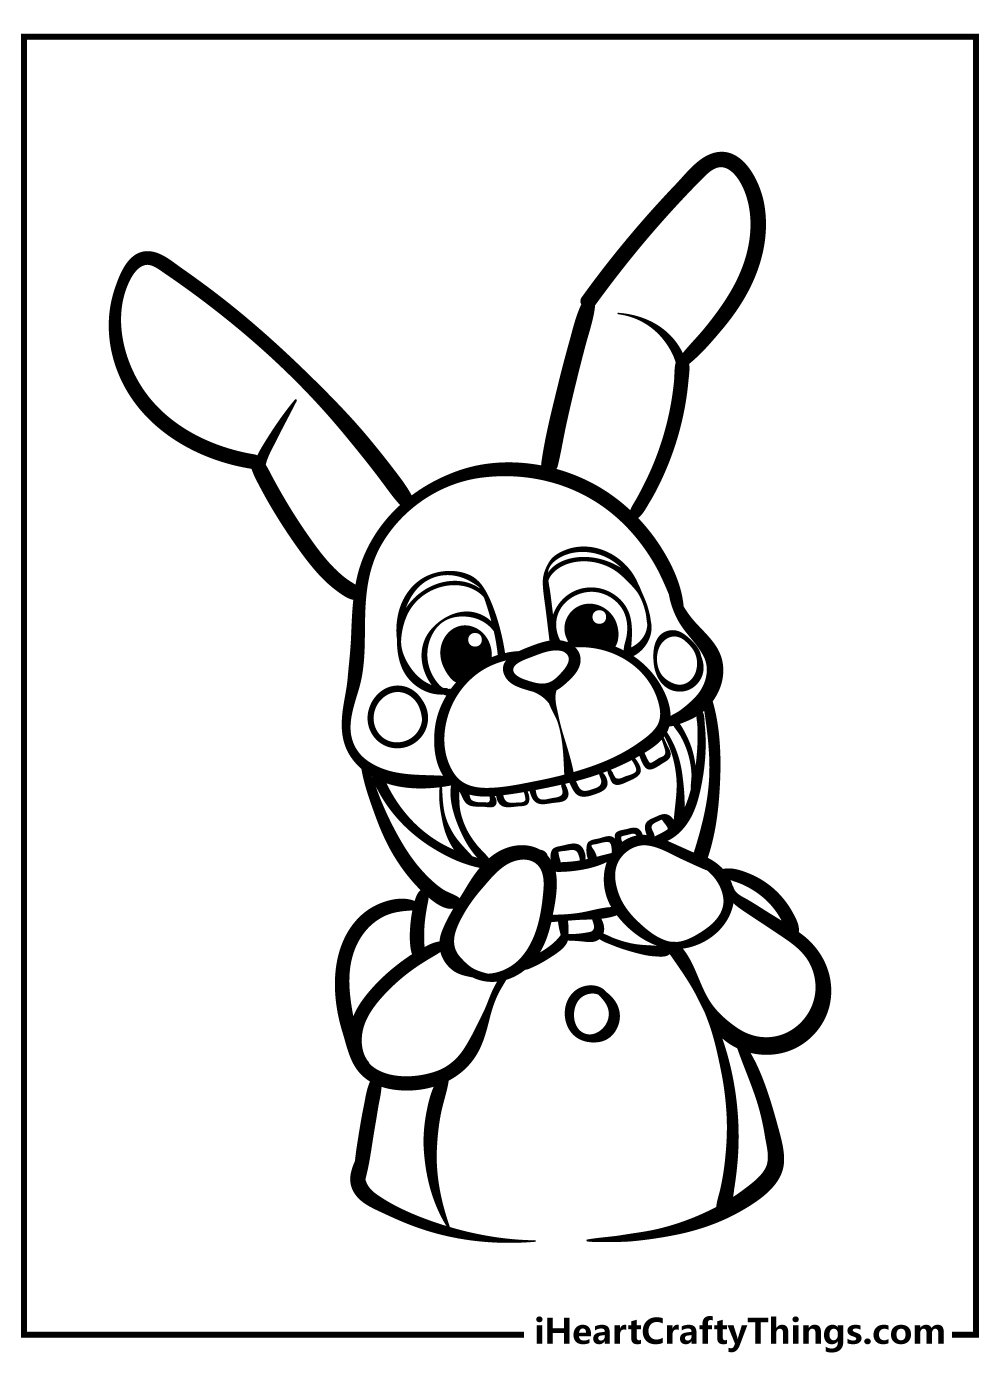 Five nights at freddys coloring pages free printables